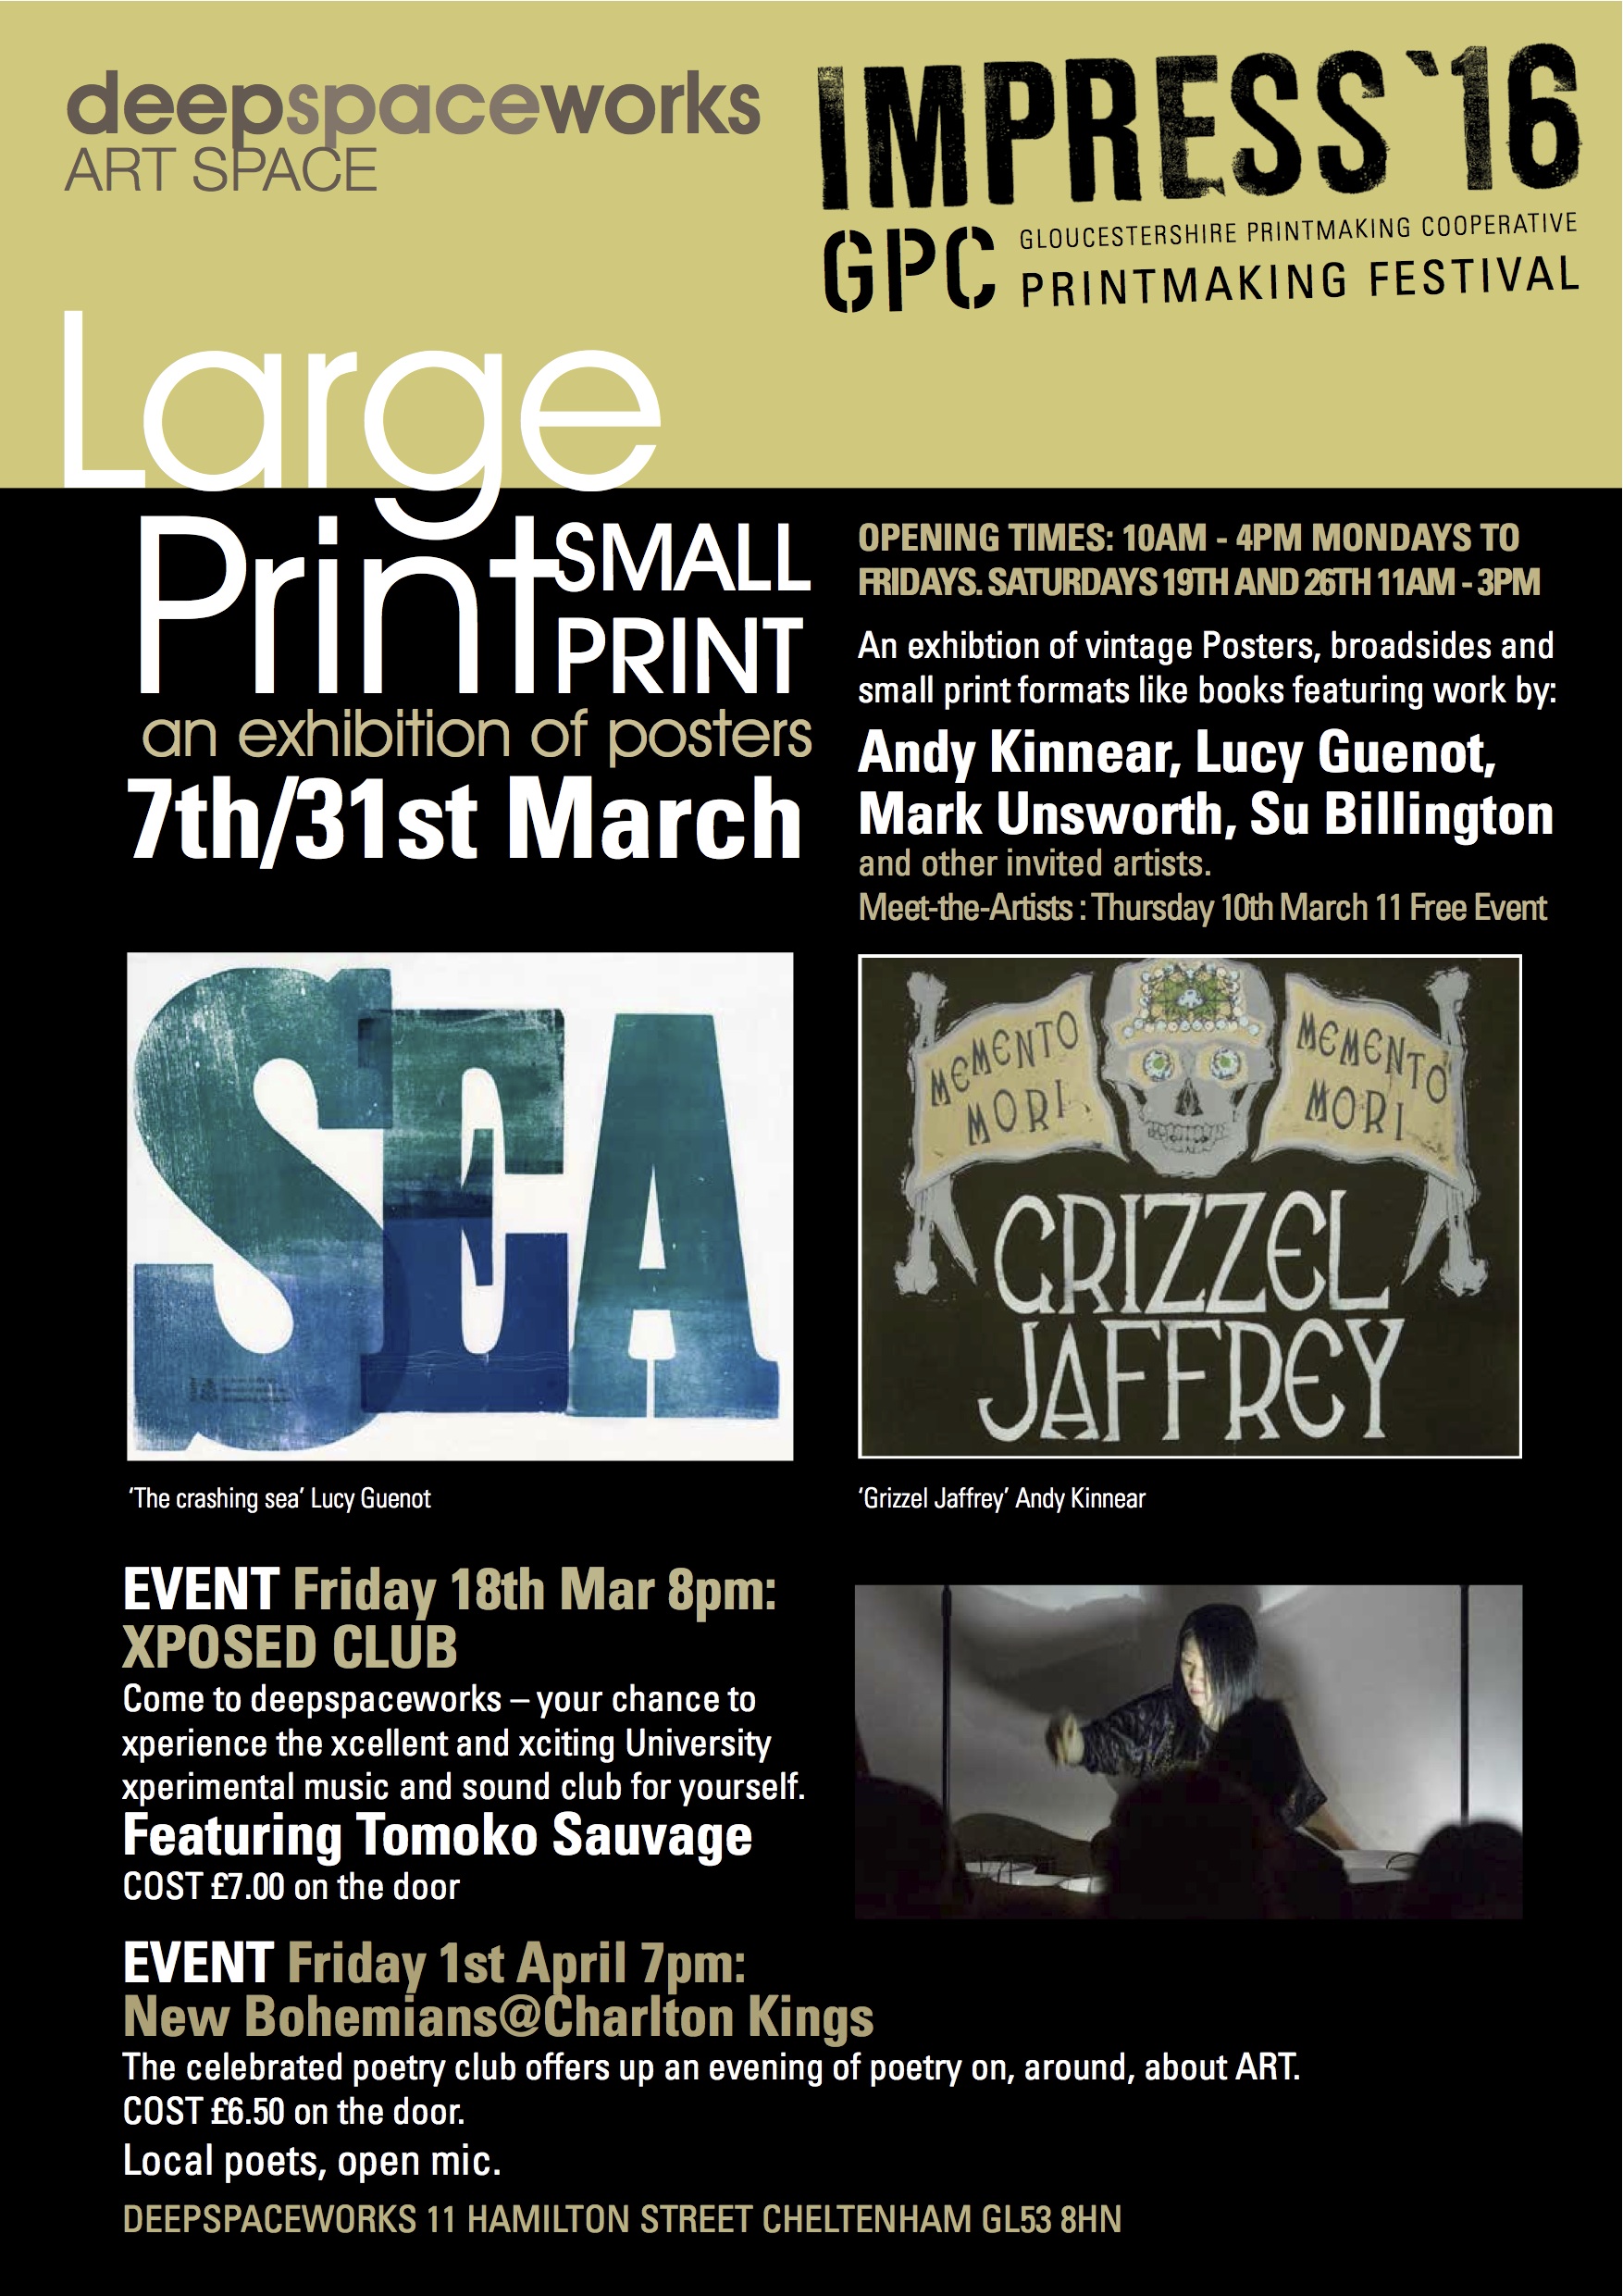 ‘Large Print, Small Print’ Exhibition for IMPRESS’16